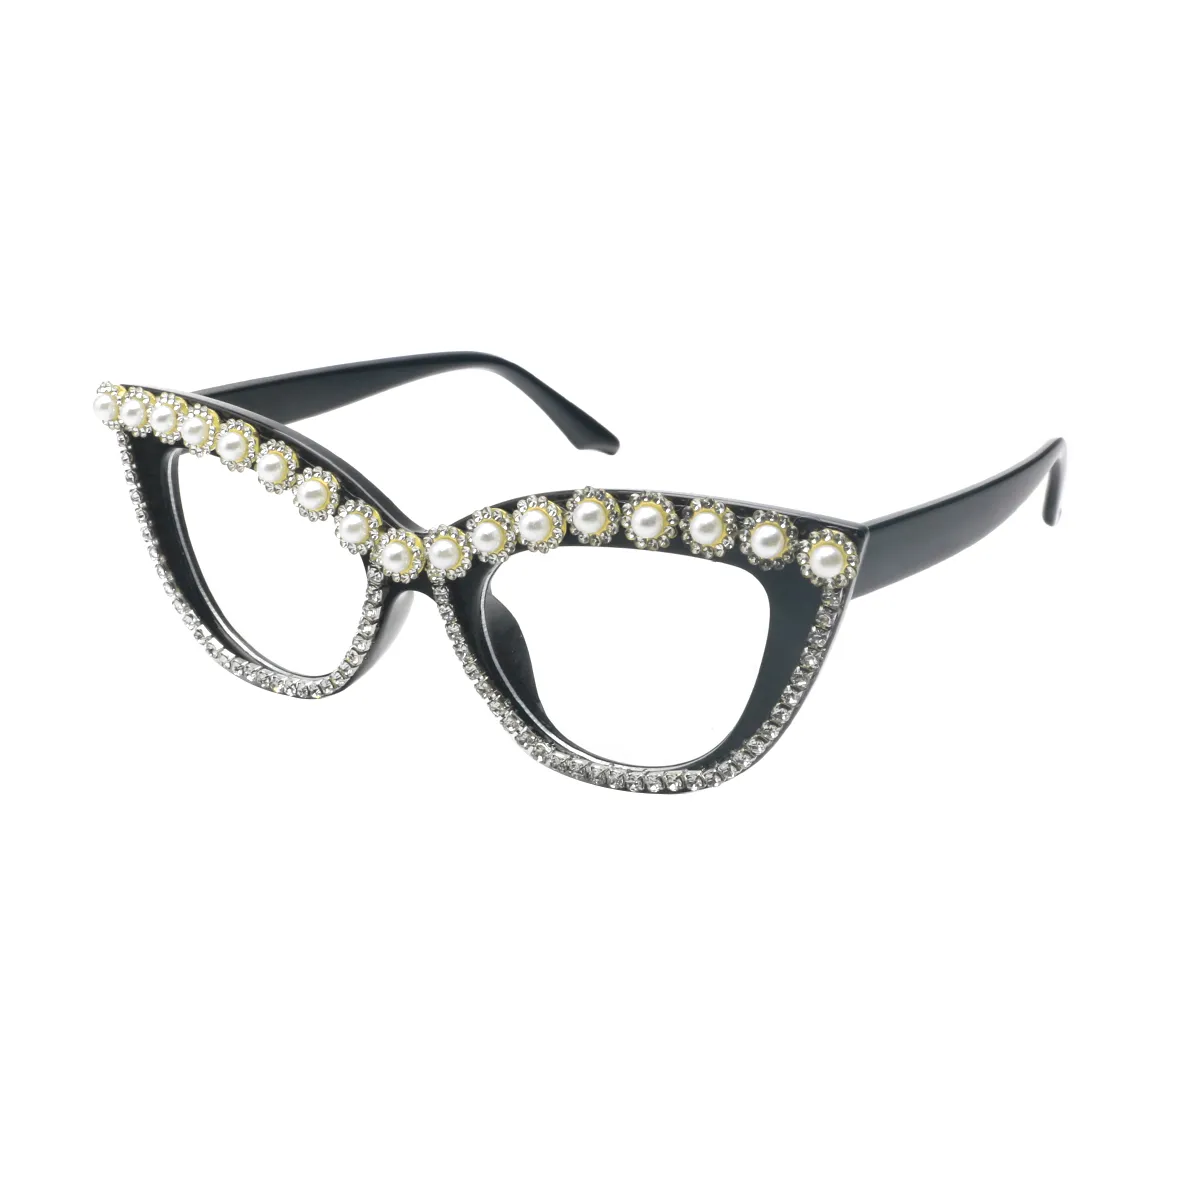 Fashion Cat-eye Gold-Silver Reading Glasses for Women